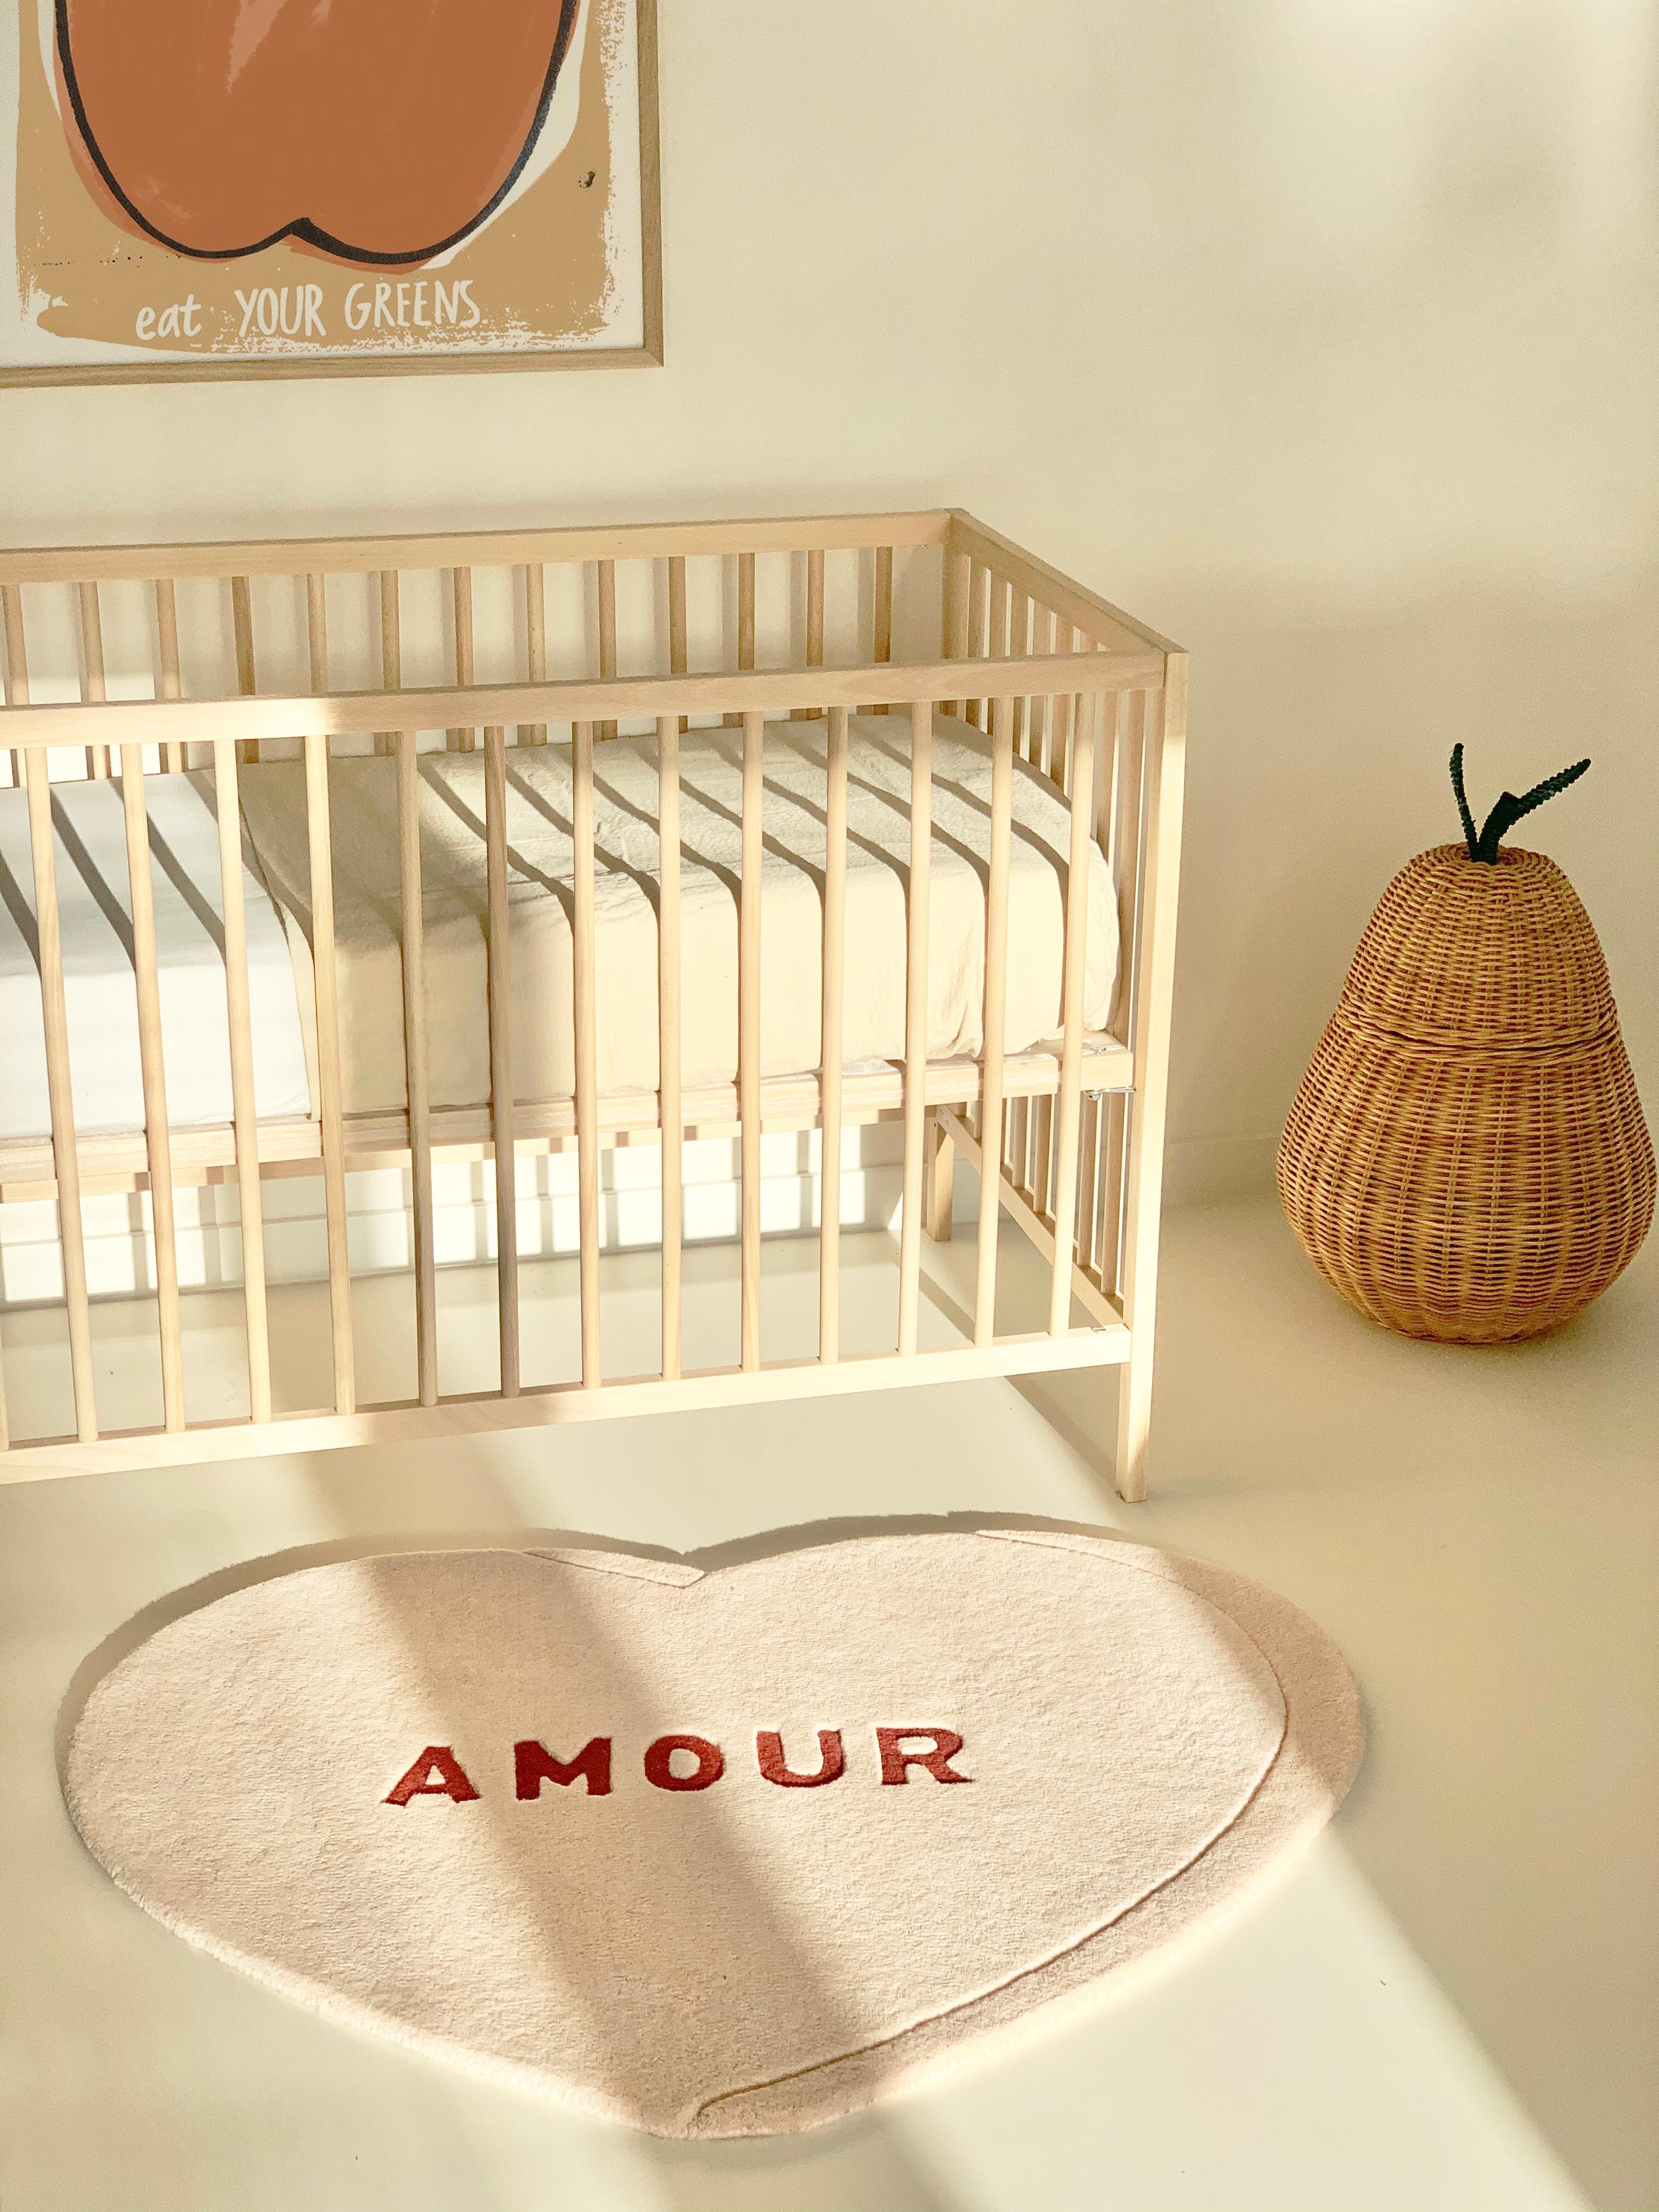 The Candy Heart Rug is a durable and sweet rug that fits any nursery or kids room. This super soft rug made of 100% New Zealand wool is hand-tufted and hand carved by artisans in India. The letters 'AMOUR' are sheared in a lower pile to create a 3D